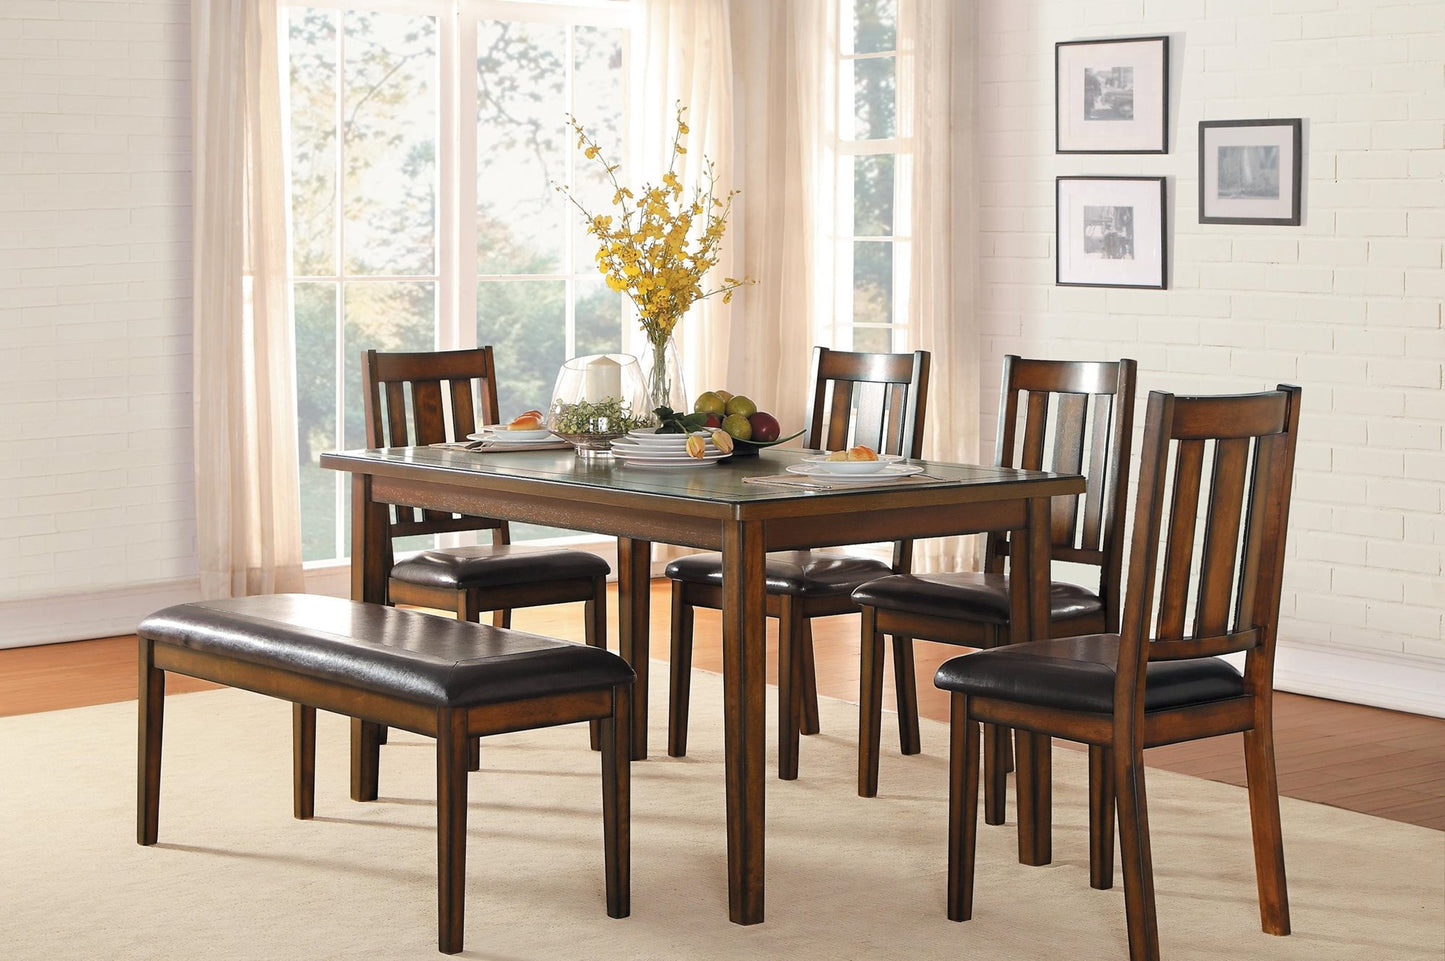 Homelegance Delmar 6PC Dining Set Table, 4 Chair, Bench in Brown